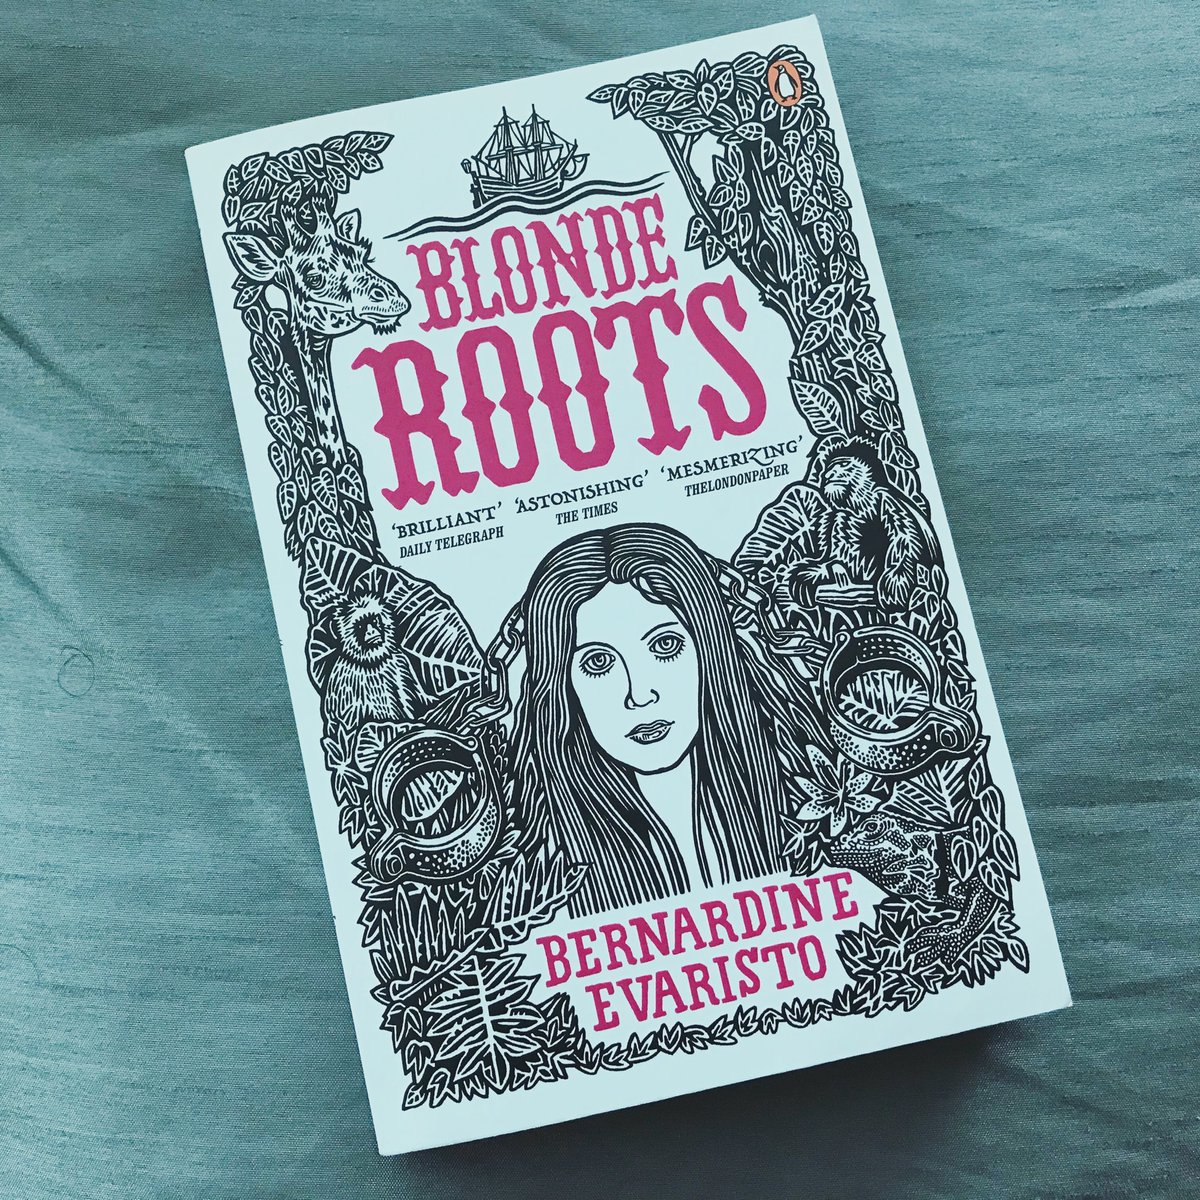 3. Blonde Roots, by  @BernardineEvari. The premise of this book - a reversal of the transatlantic slave trade - is thought-provoking & challenging. A compelling story that makes you realise just how deeply racism is embedded in western cultural norms.